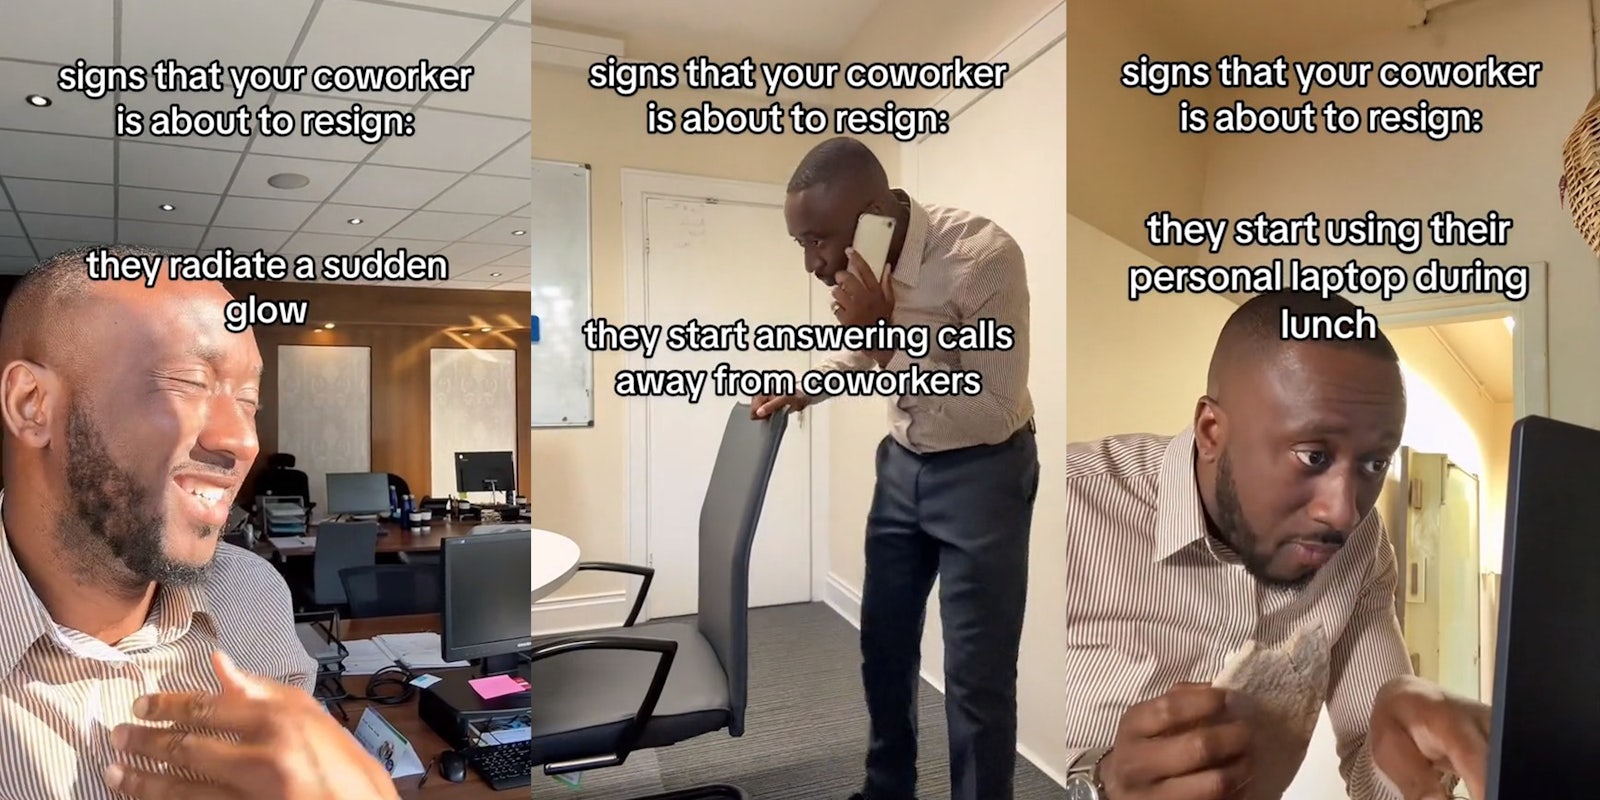 Man in office environment showing different situations on how a worker behaves right before they resign